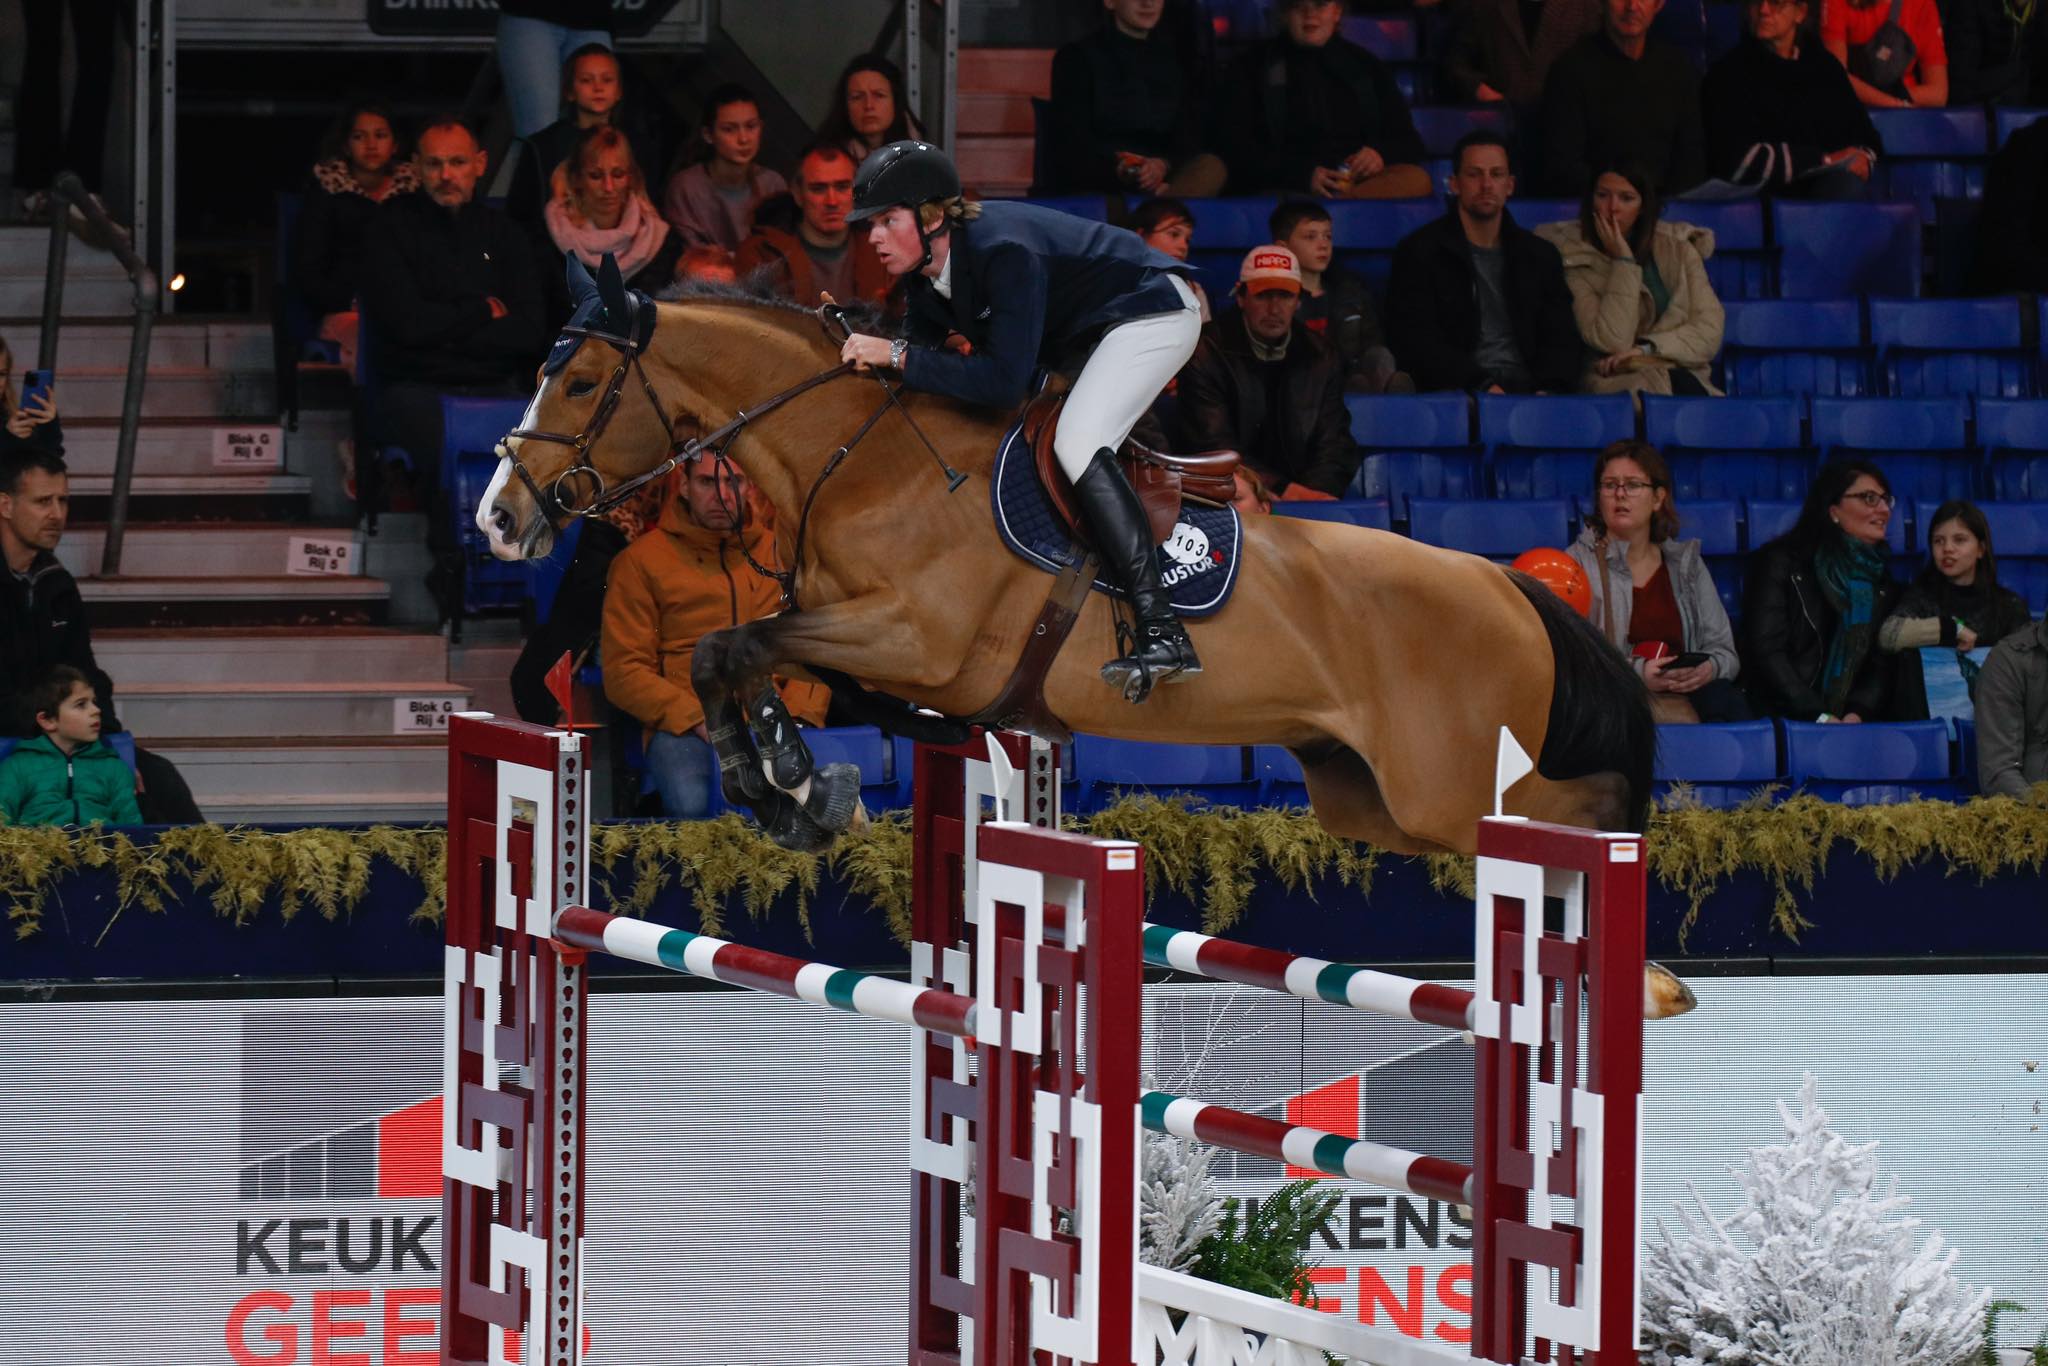 Leon Brutsaert: "Jumping Mechelen is the most beautiful indoor competition of the year ..."